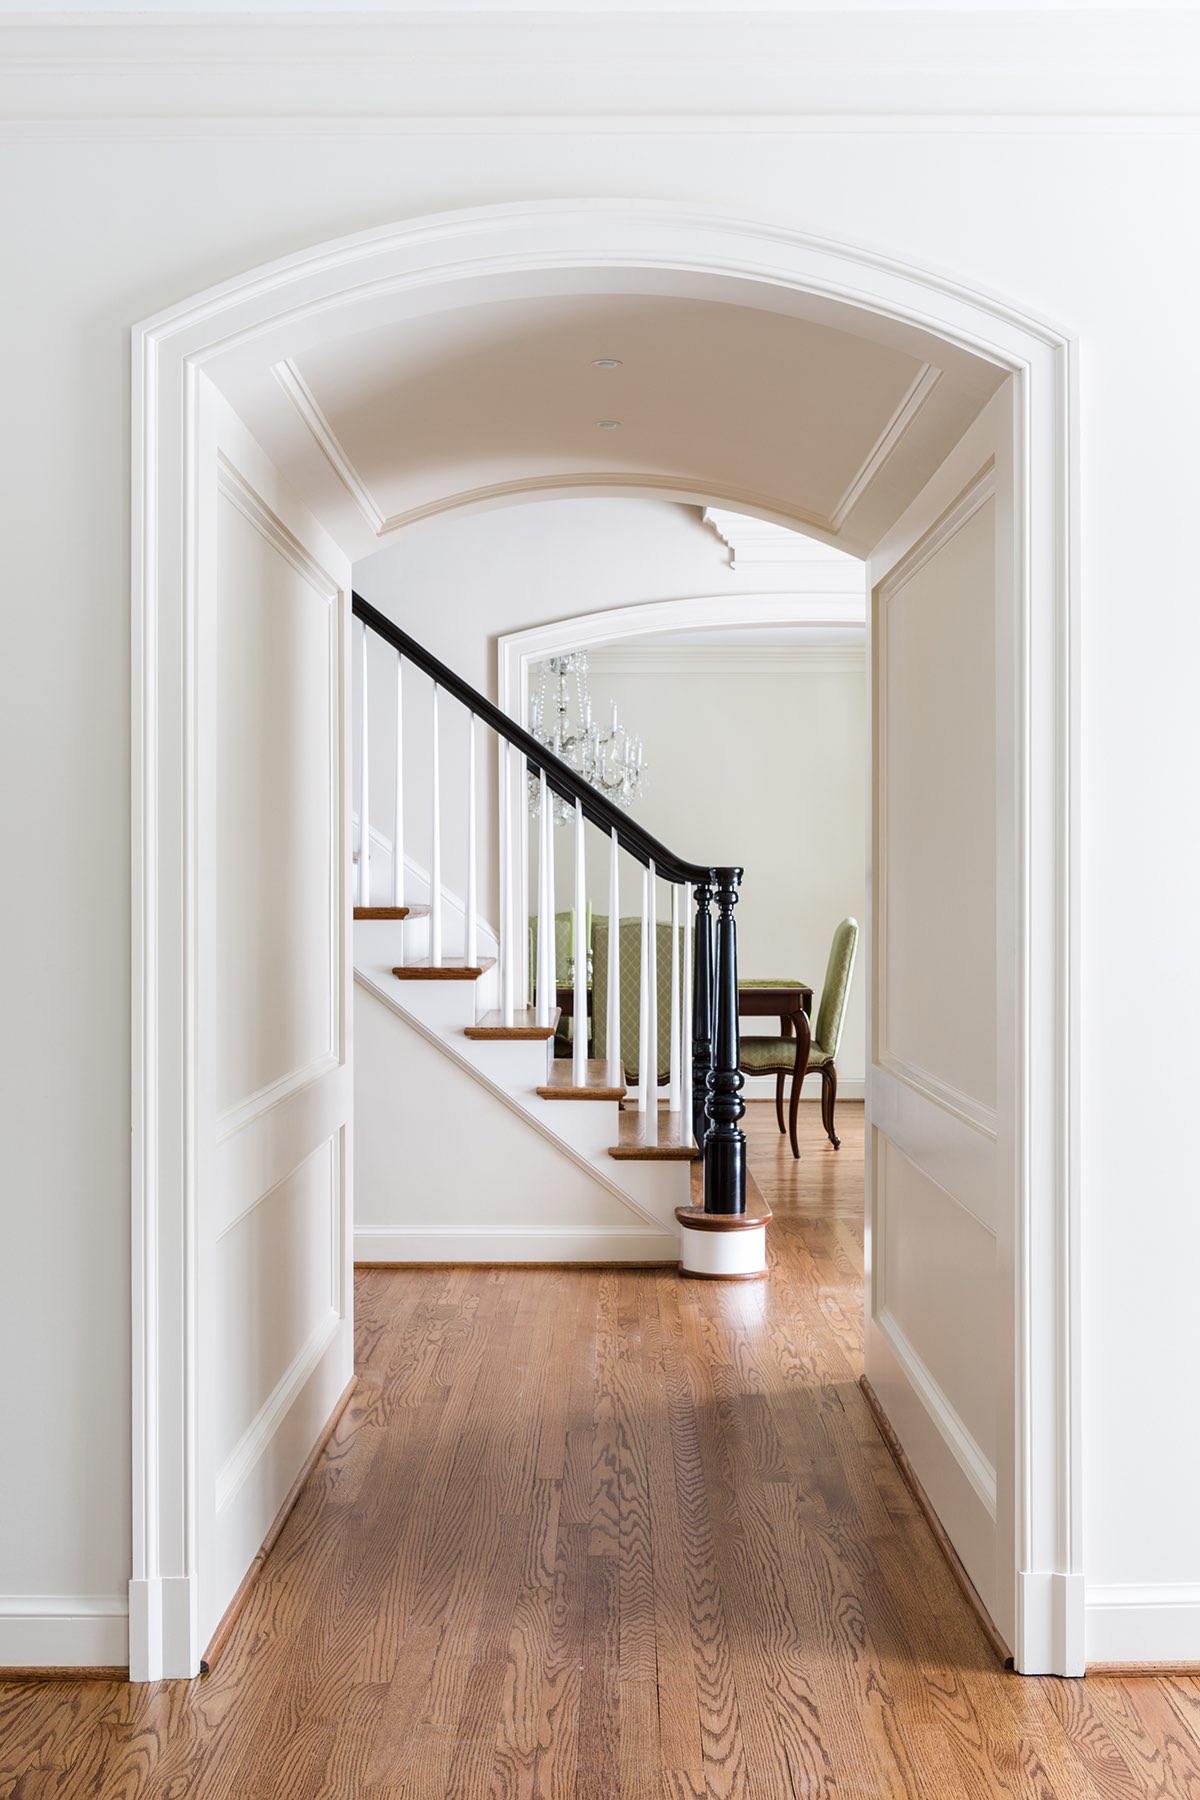 Custom hall archway and artisanal black paint finish on stairs